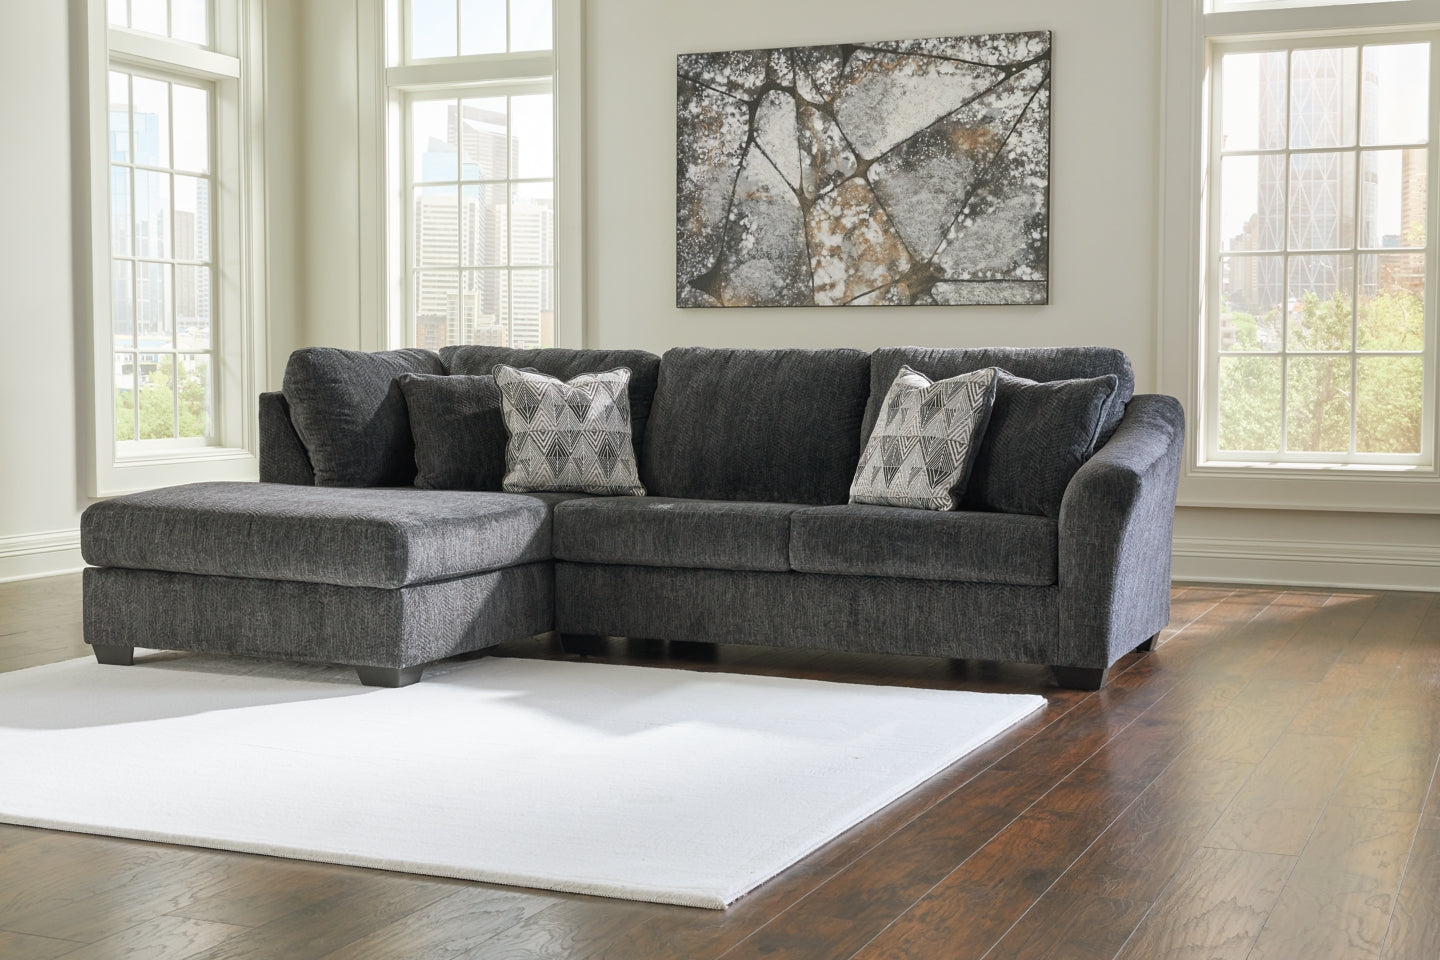 Biddeford 2-Piece Sectional with Chaise - 35504S1